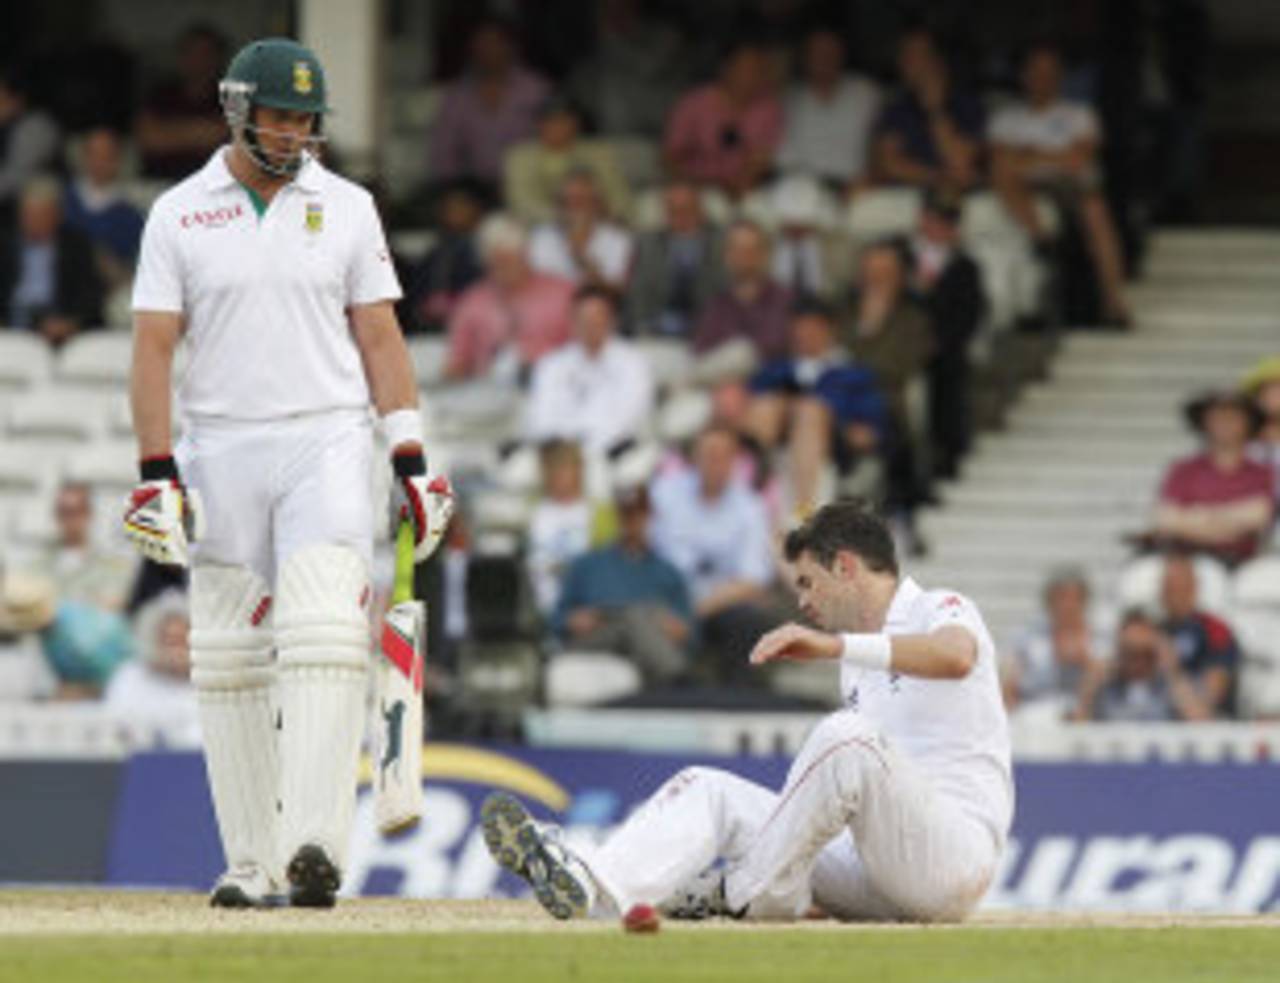 England's bowlers had a chastening day, England v South Africa, 1st Investec Test, The Oval, 3rd day, July 21, 2012